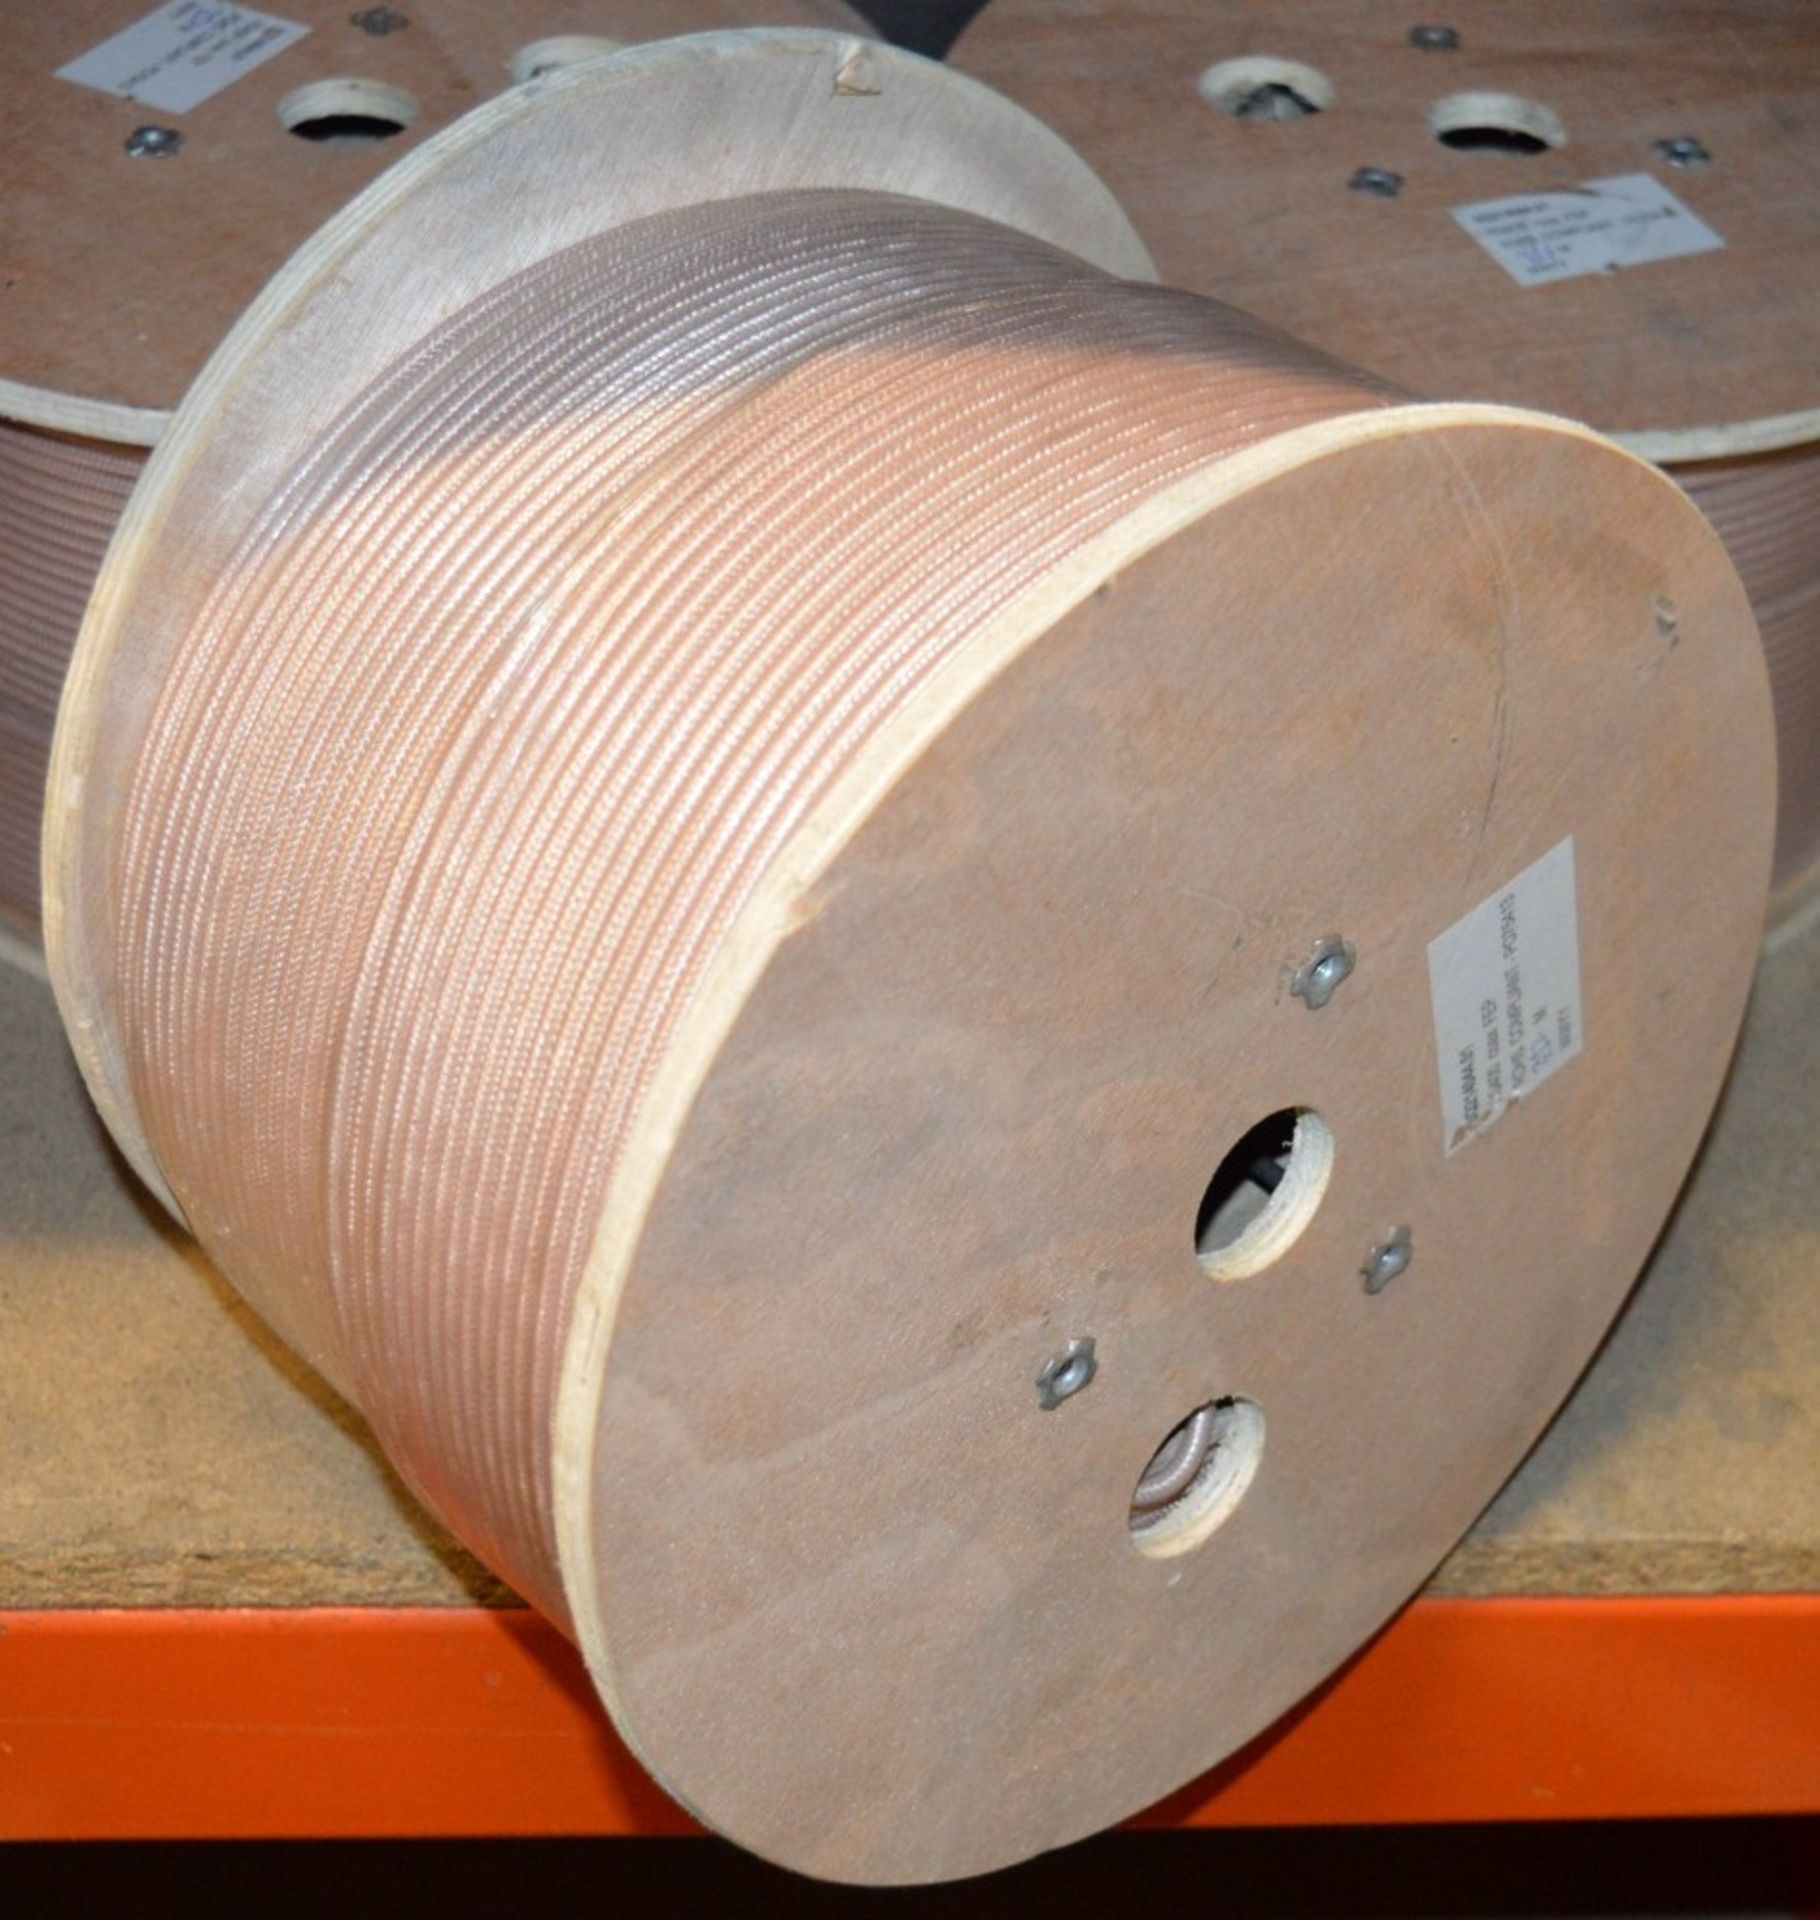 356 x Meter Reel RG400 Coax FEP Cable - Brand New Stock - ROHS Compliant - Brand New Stock - CL300 - - Image 5 of 5